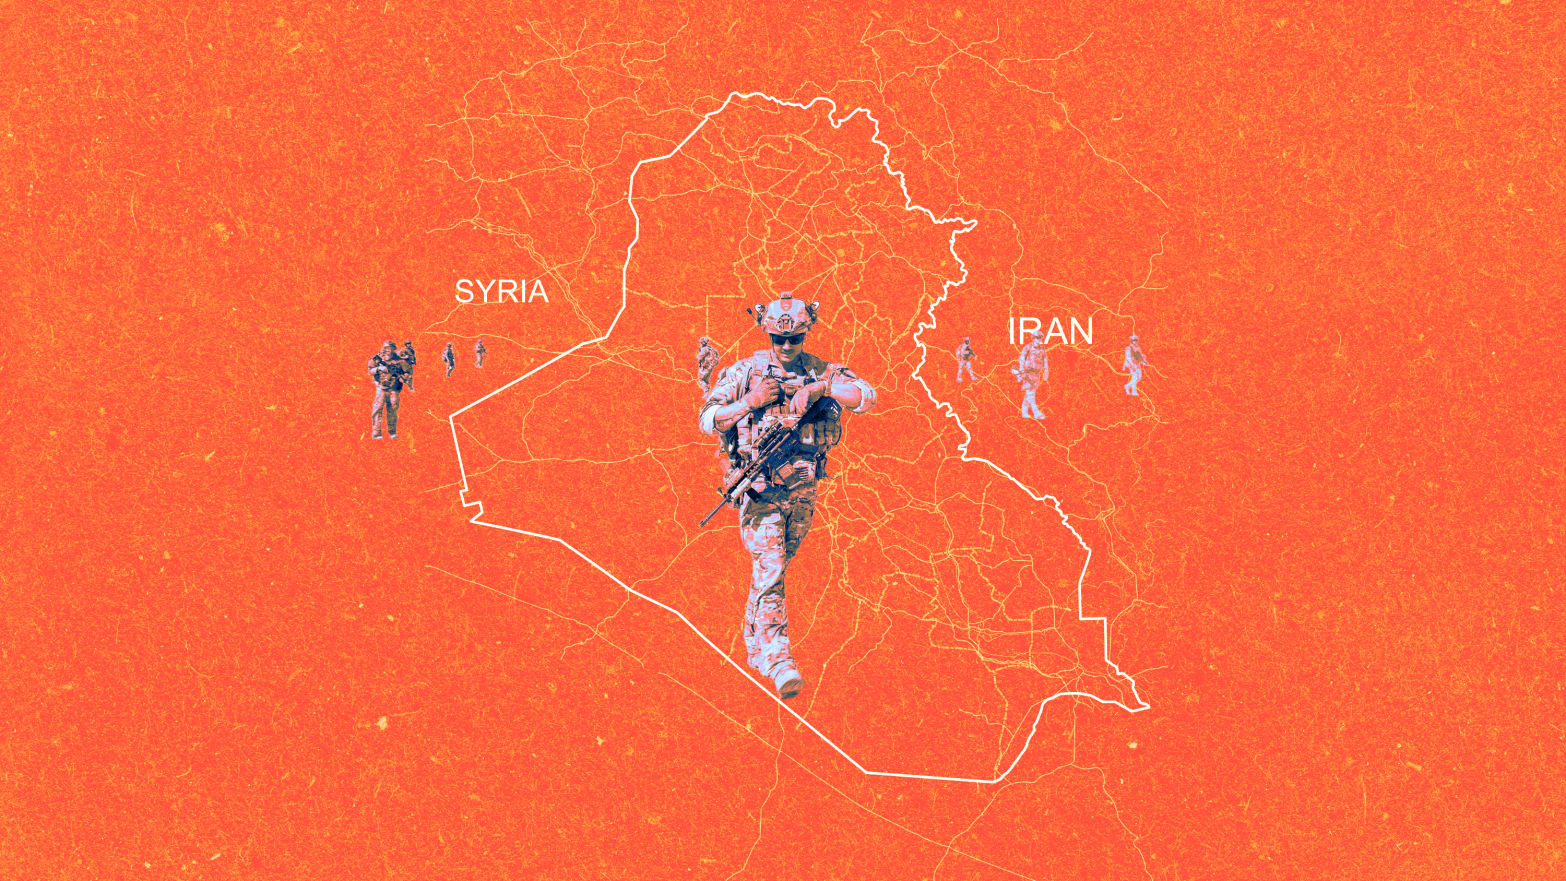 A photo illustration of US Army soldiers and the map of Syria, Iraq, and Iran.